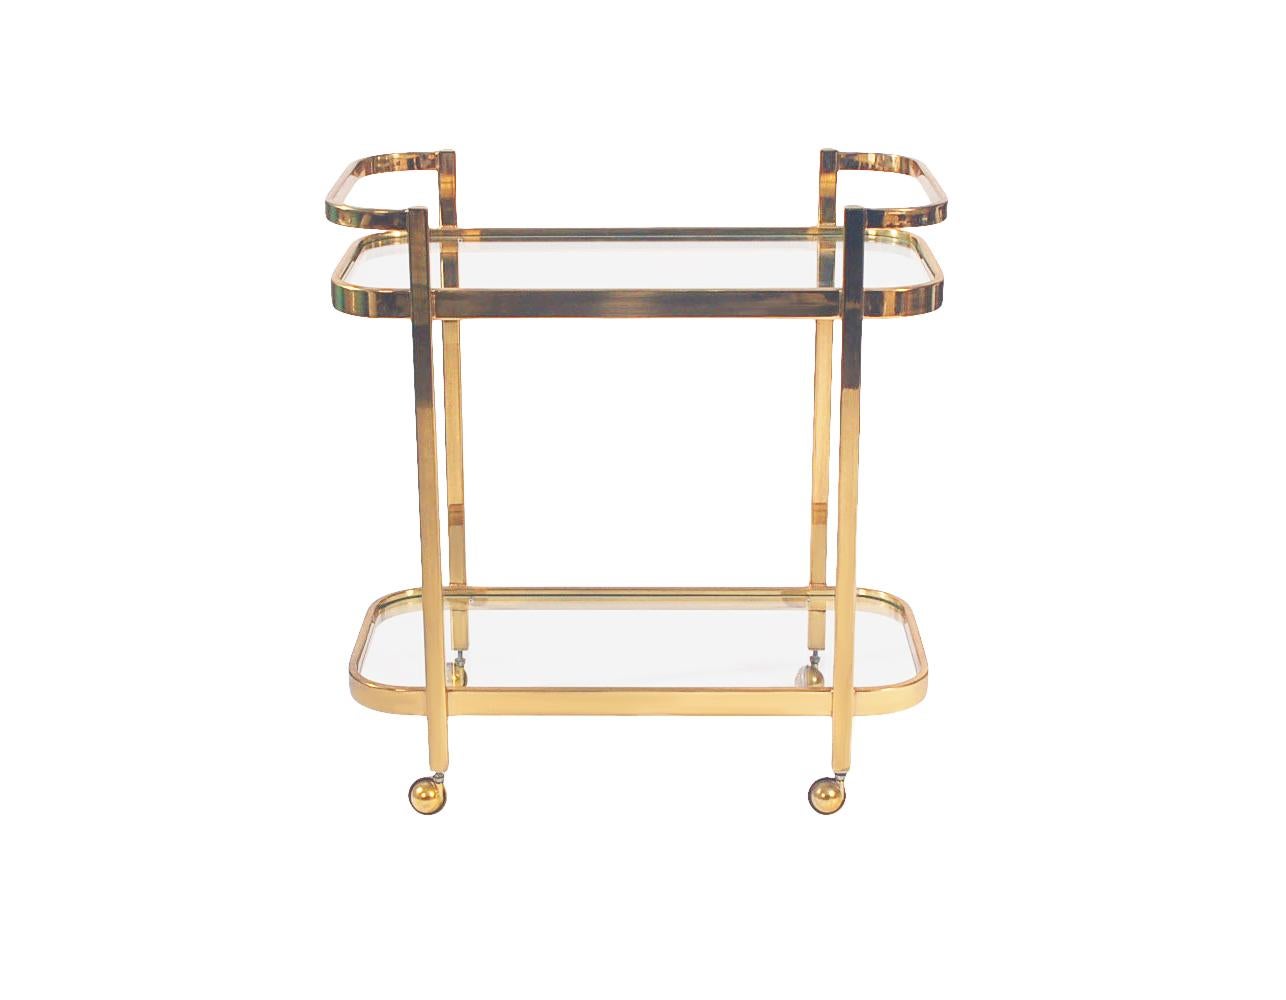 A simple, modern and elegant bar cart circa 1970's. It features brass framing with clear glass shelving.